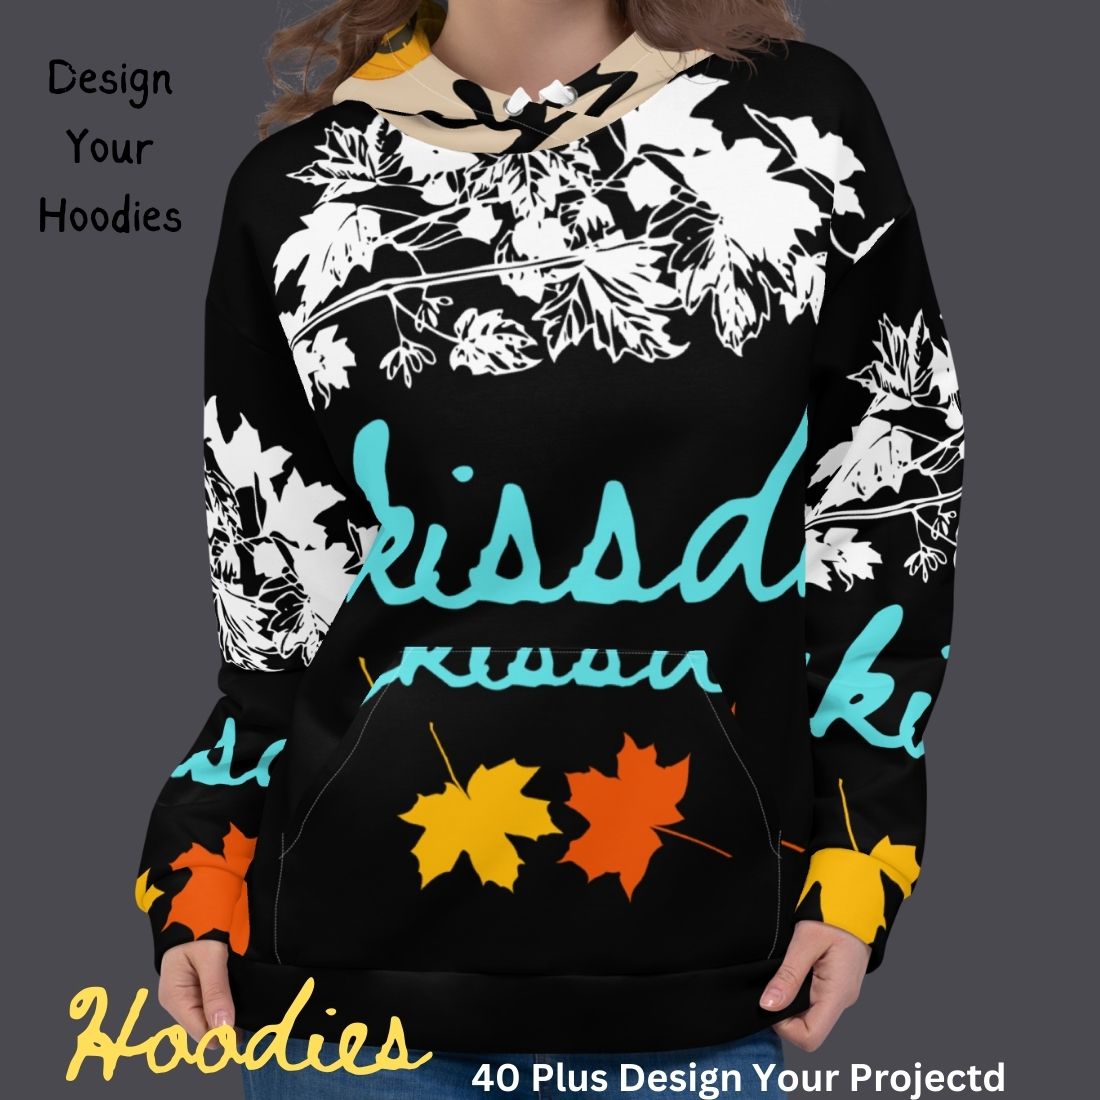 Hoodies for women / ladies / Kids - design for you & project Buy now cover image.